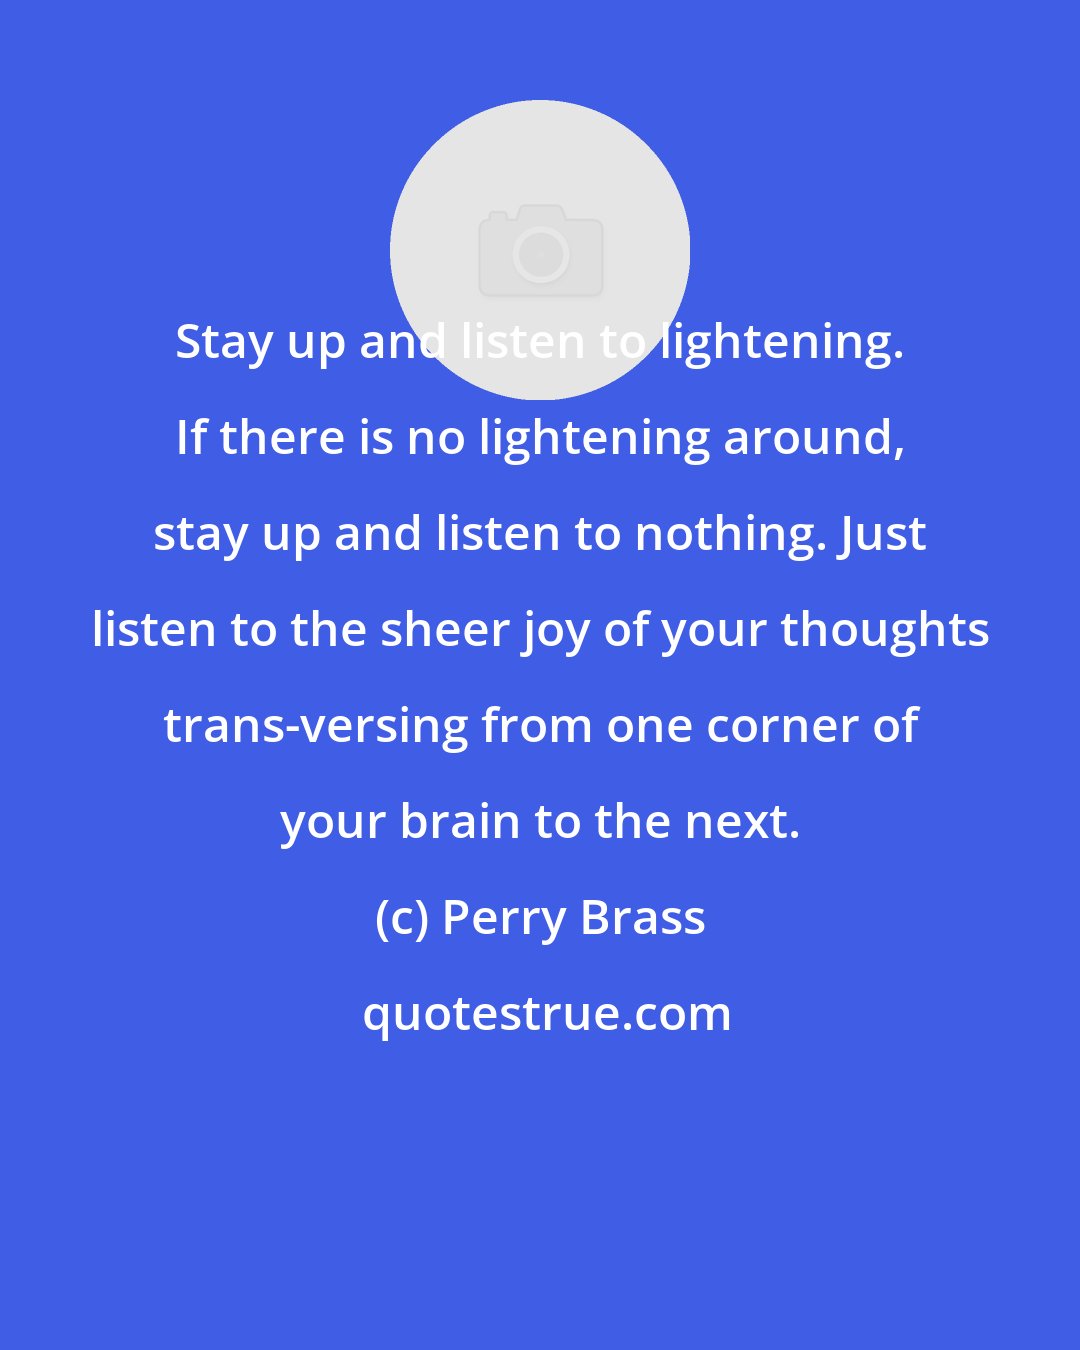 Perry Brass: Stay up and listen to lightening. If there is no lightening around, stay up and listen to nothing. Just listen to the sheer joy of your thoughts trans-versing from one corner of your brain to the next.